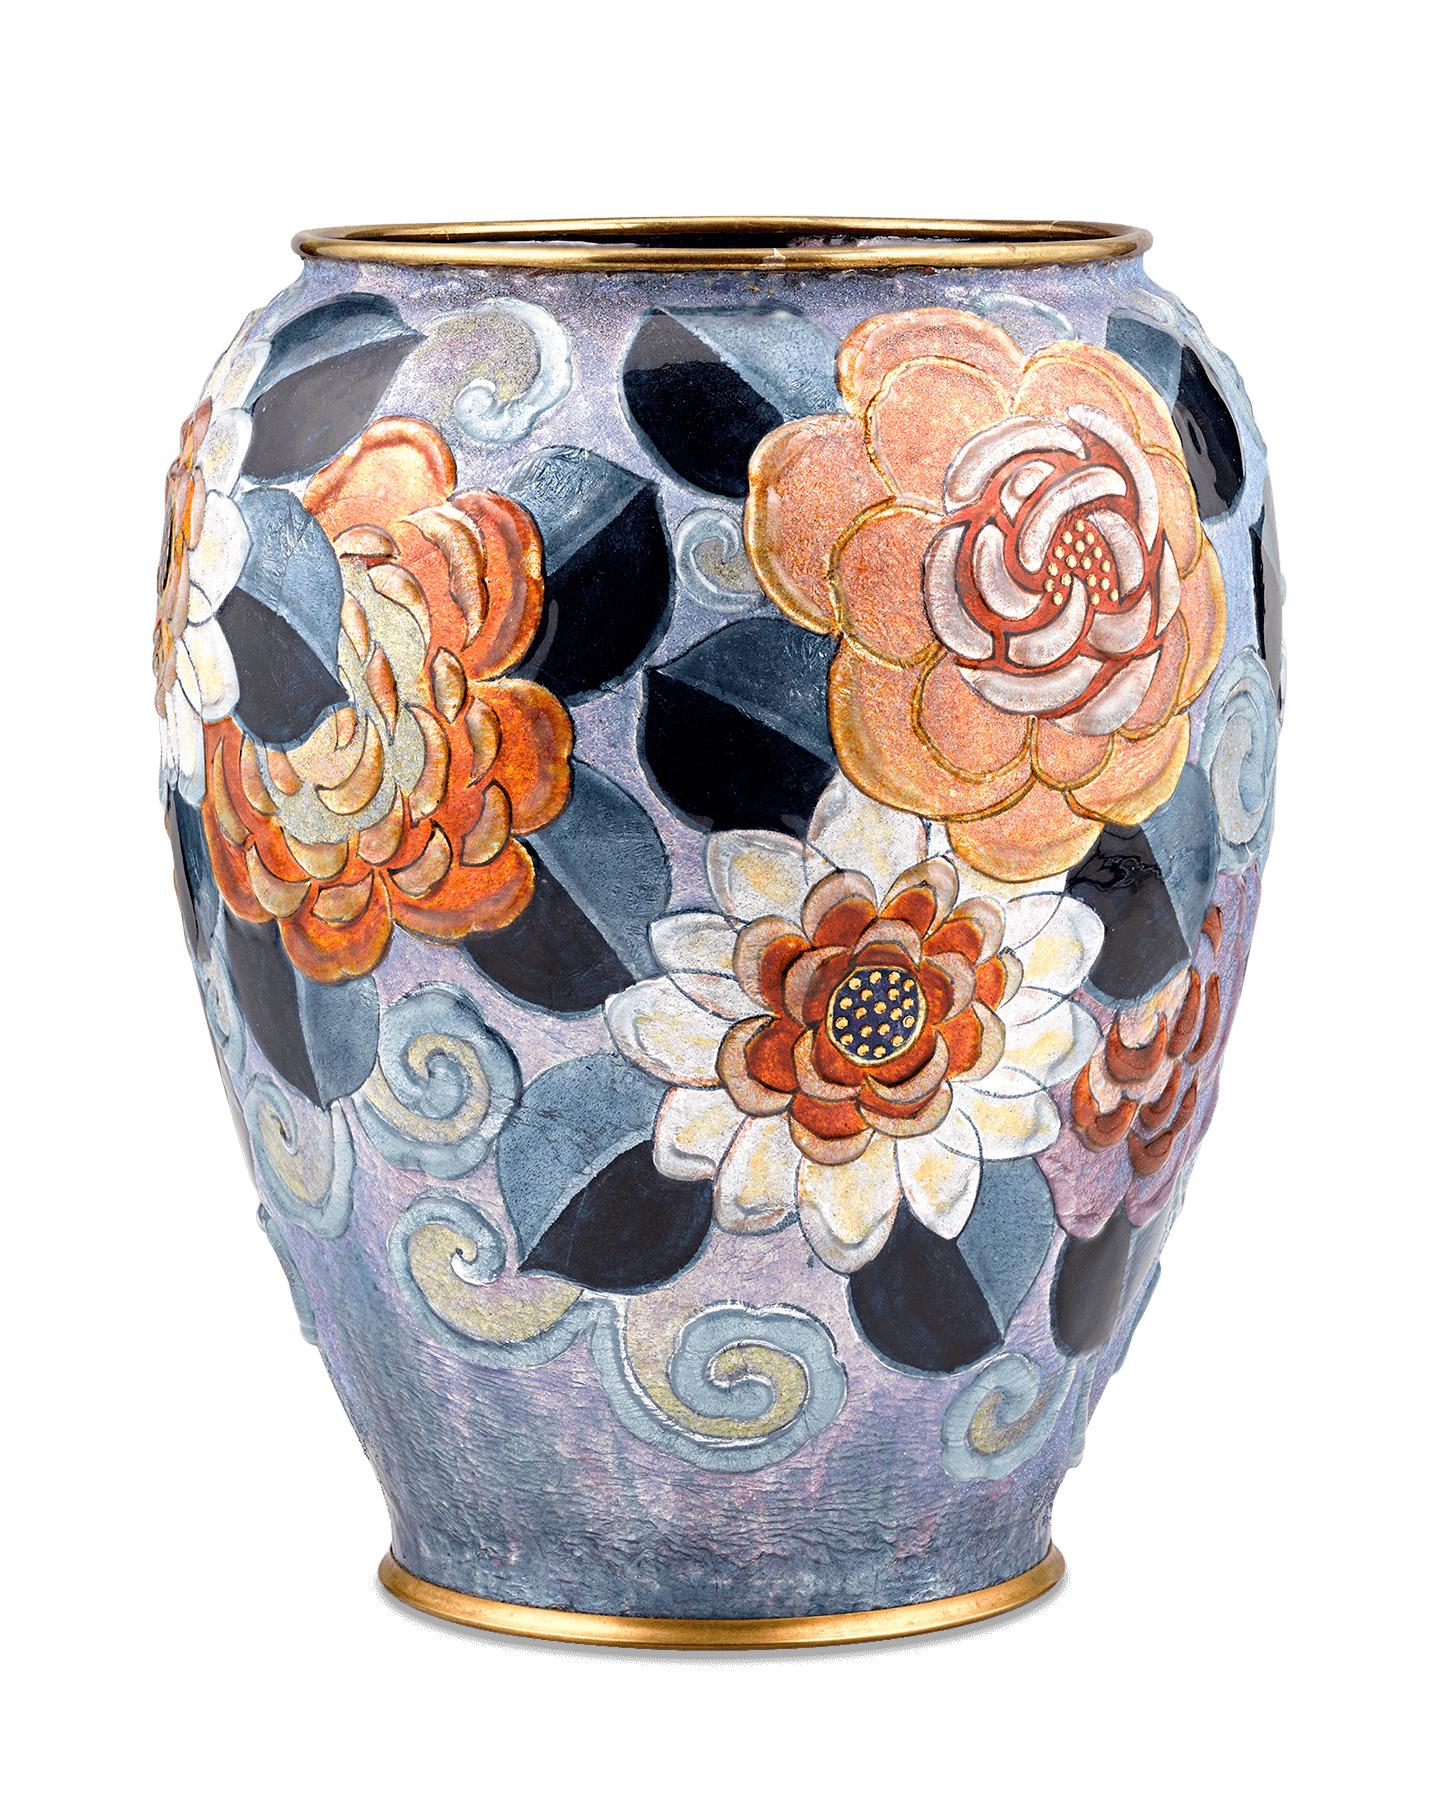 Brilliantly colored flowers are in full bloom on this rare Limoges enameled vase by Camille Fauré. Decorated in a vibrantly hued floral motif, this vase is a feast for the senses, featuring a tactile as well as visual beauty. The vase's unique